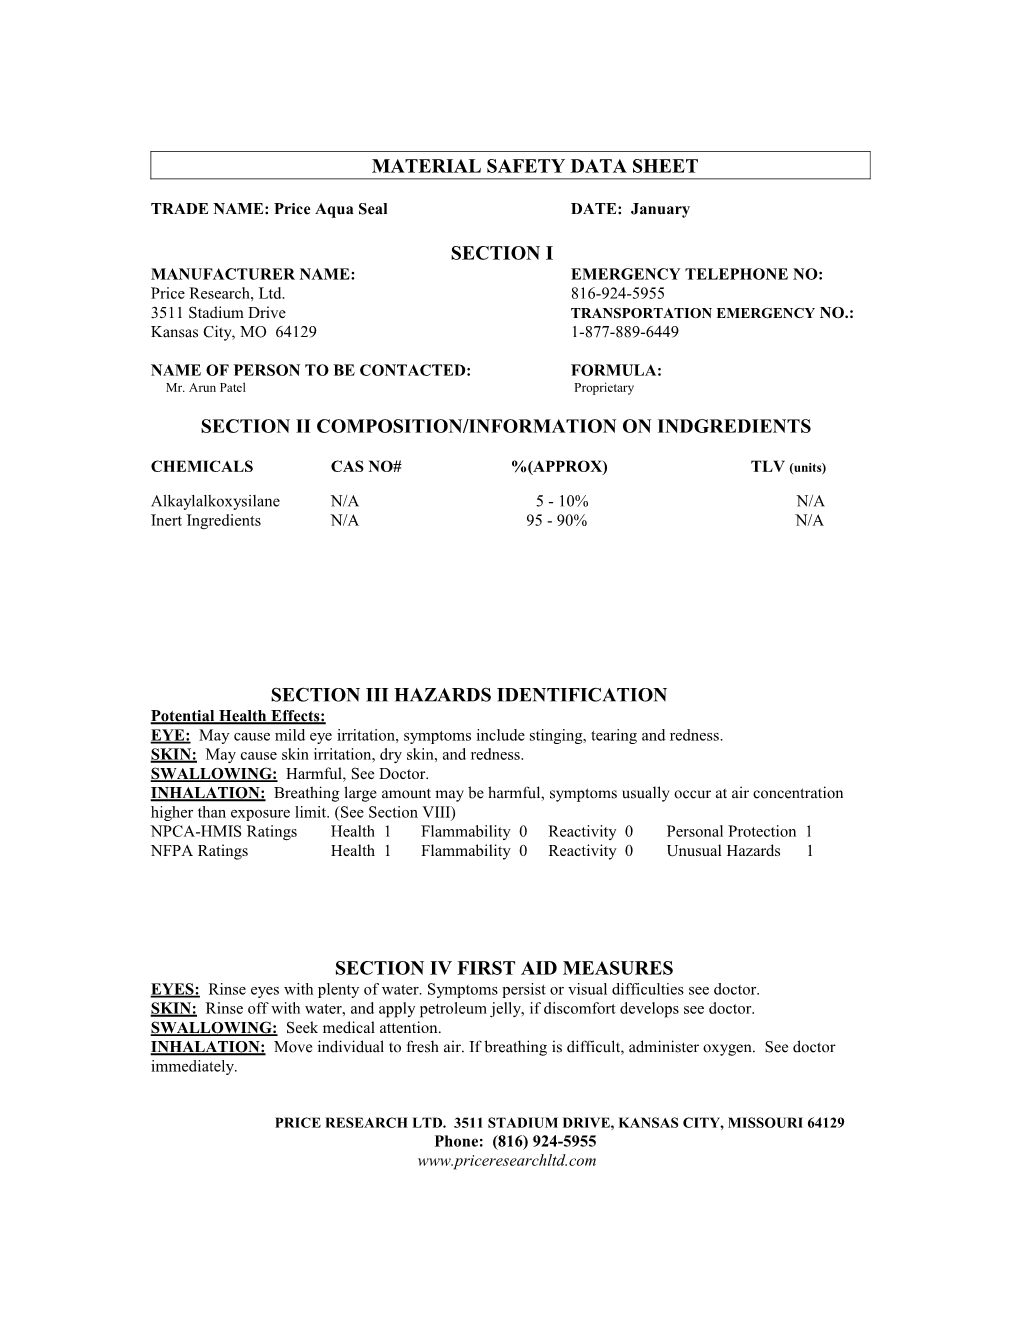 Material Safety Data Sheet s152